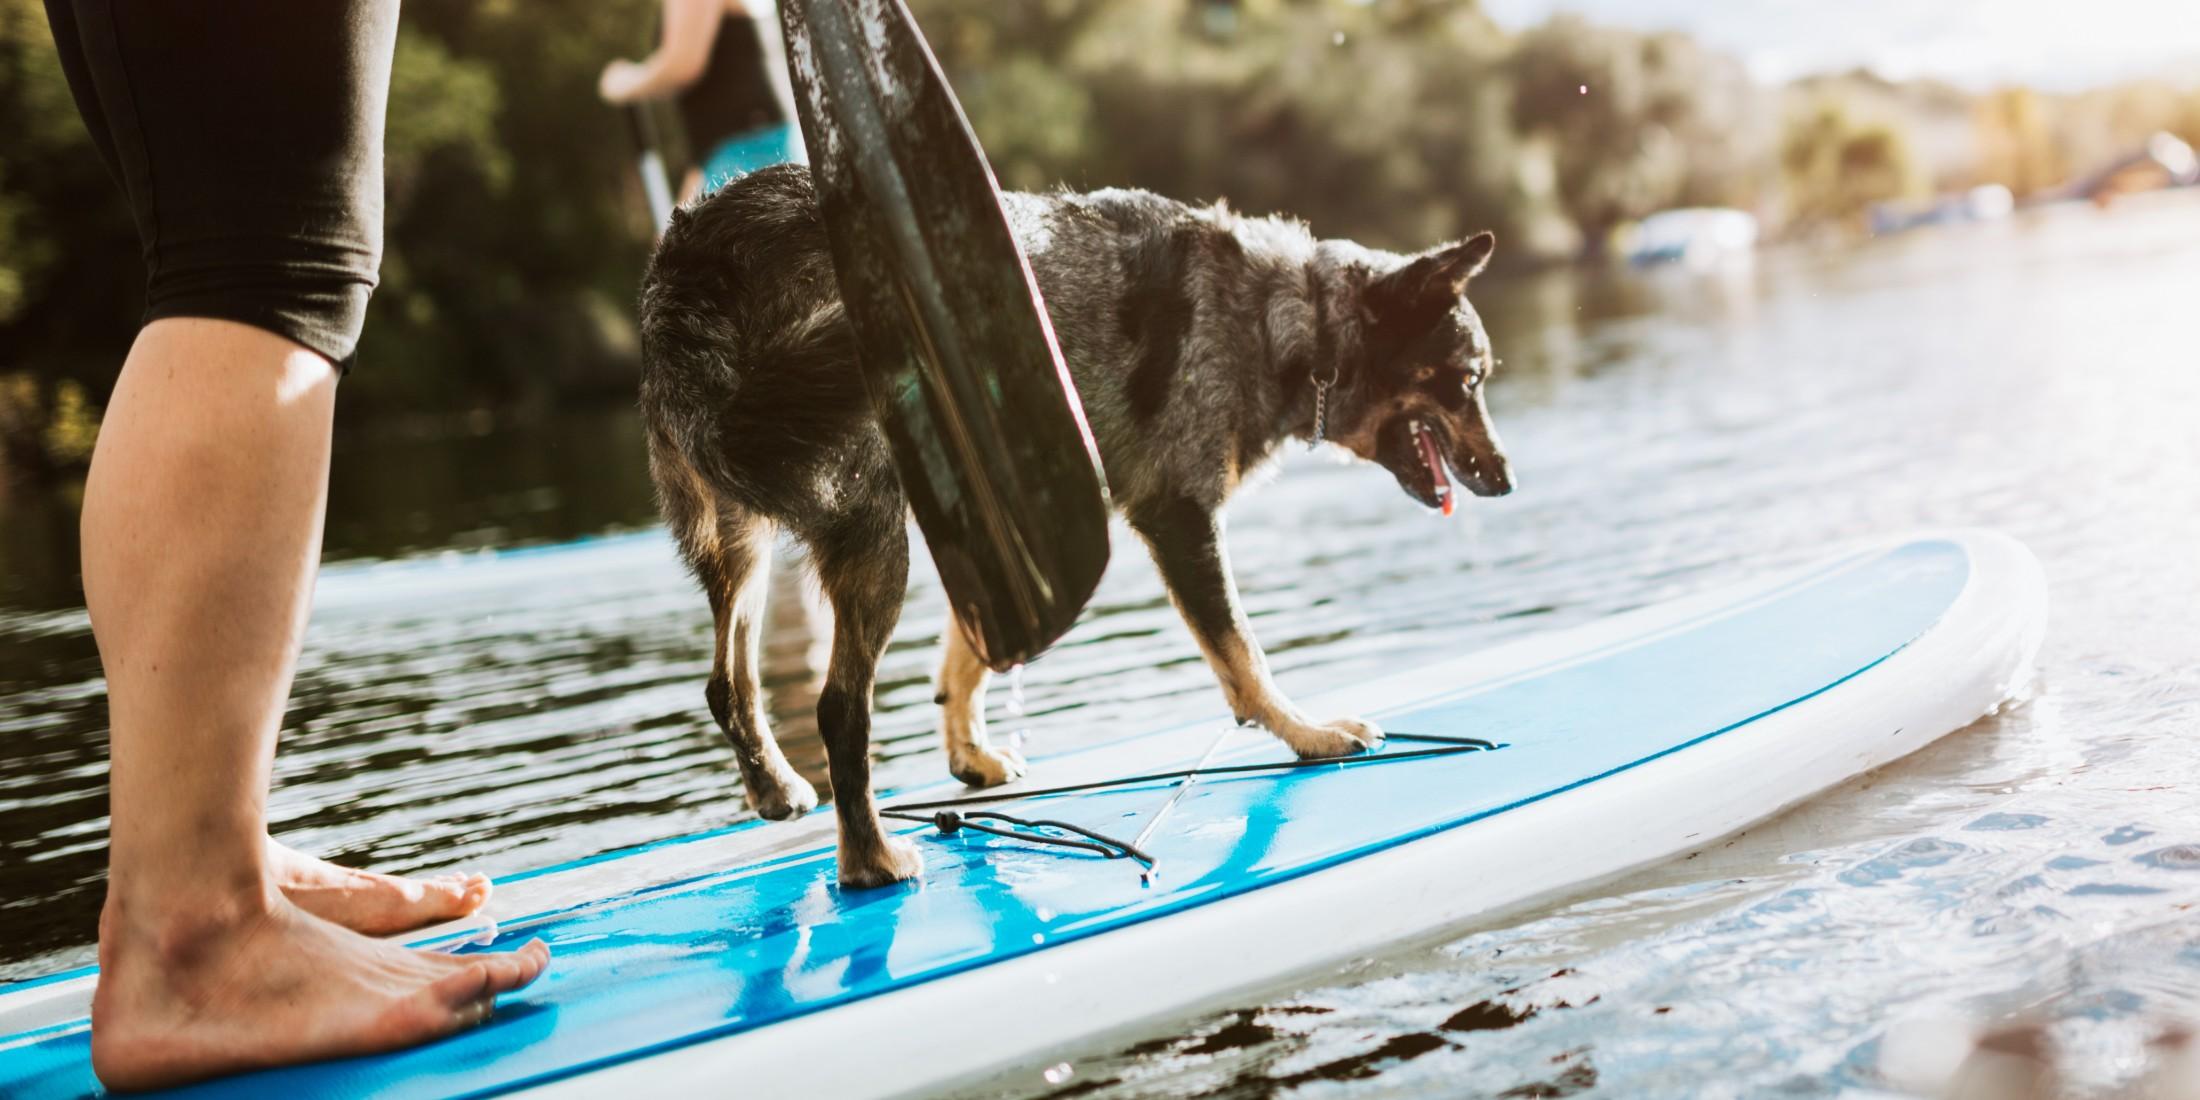 Try SUP with your dog